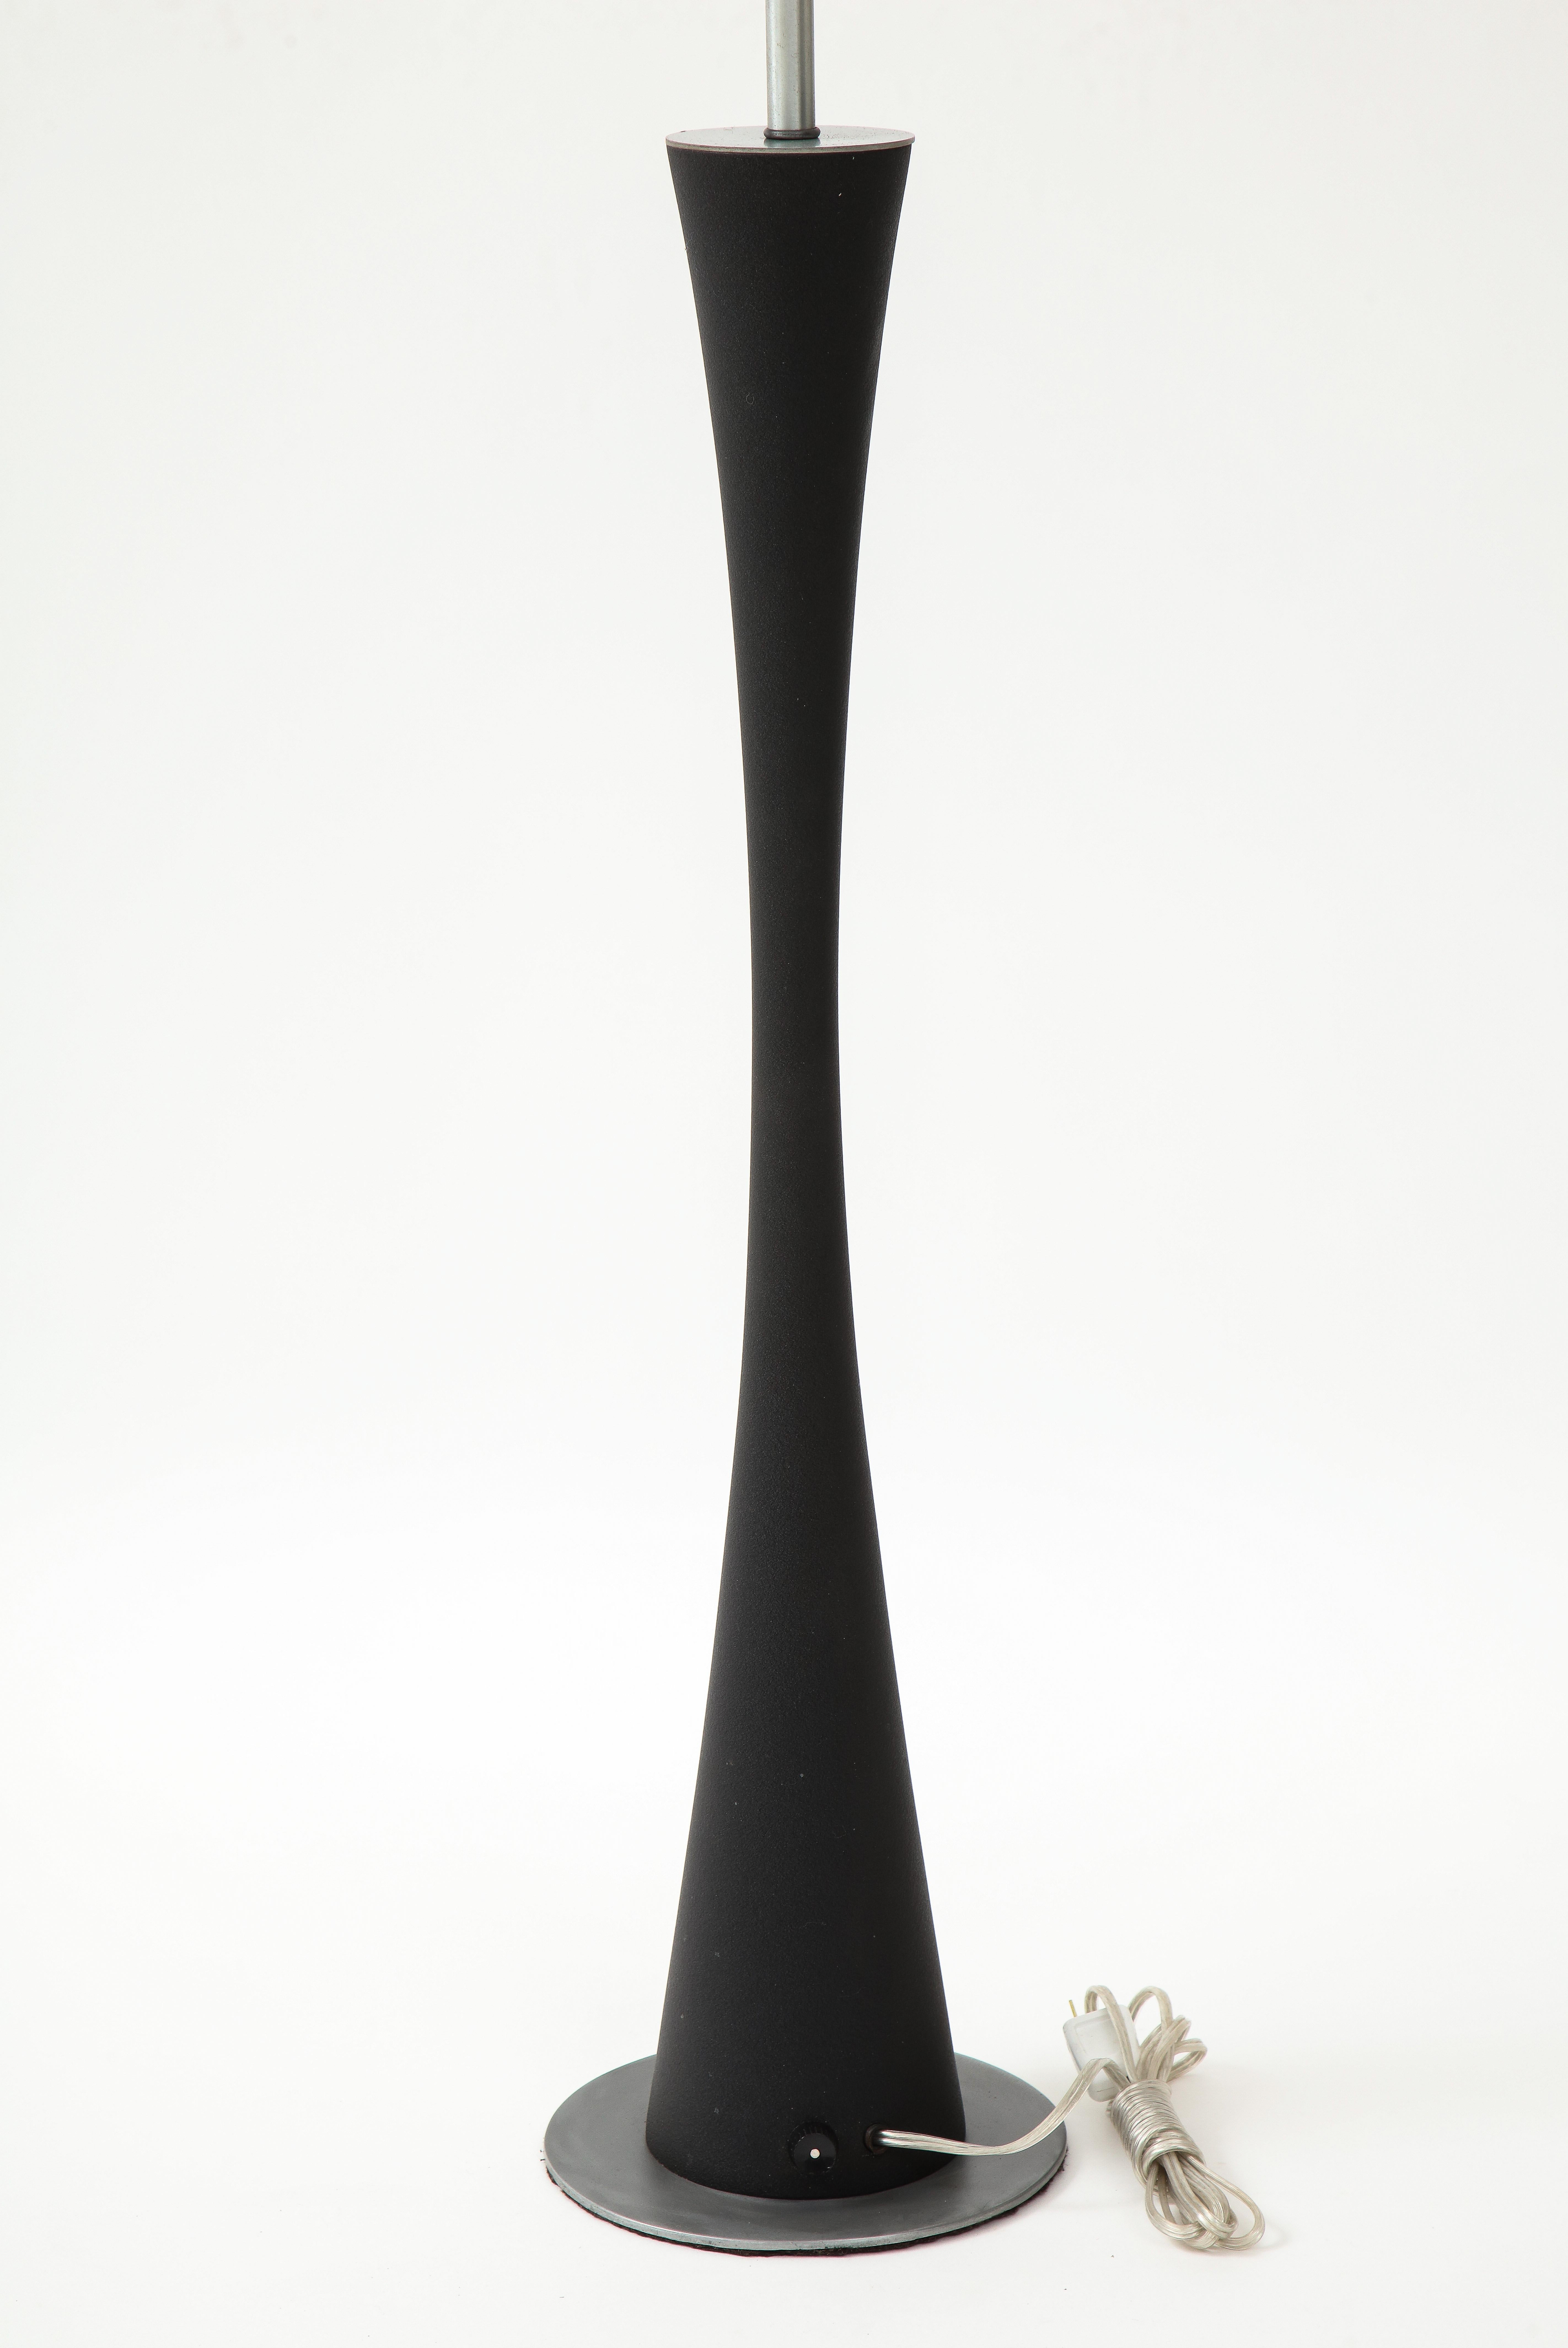 Stewart Ross James for Hansen Modernist Tall Table Lamp In Good Condition For Sale In New York, NY